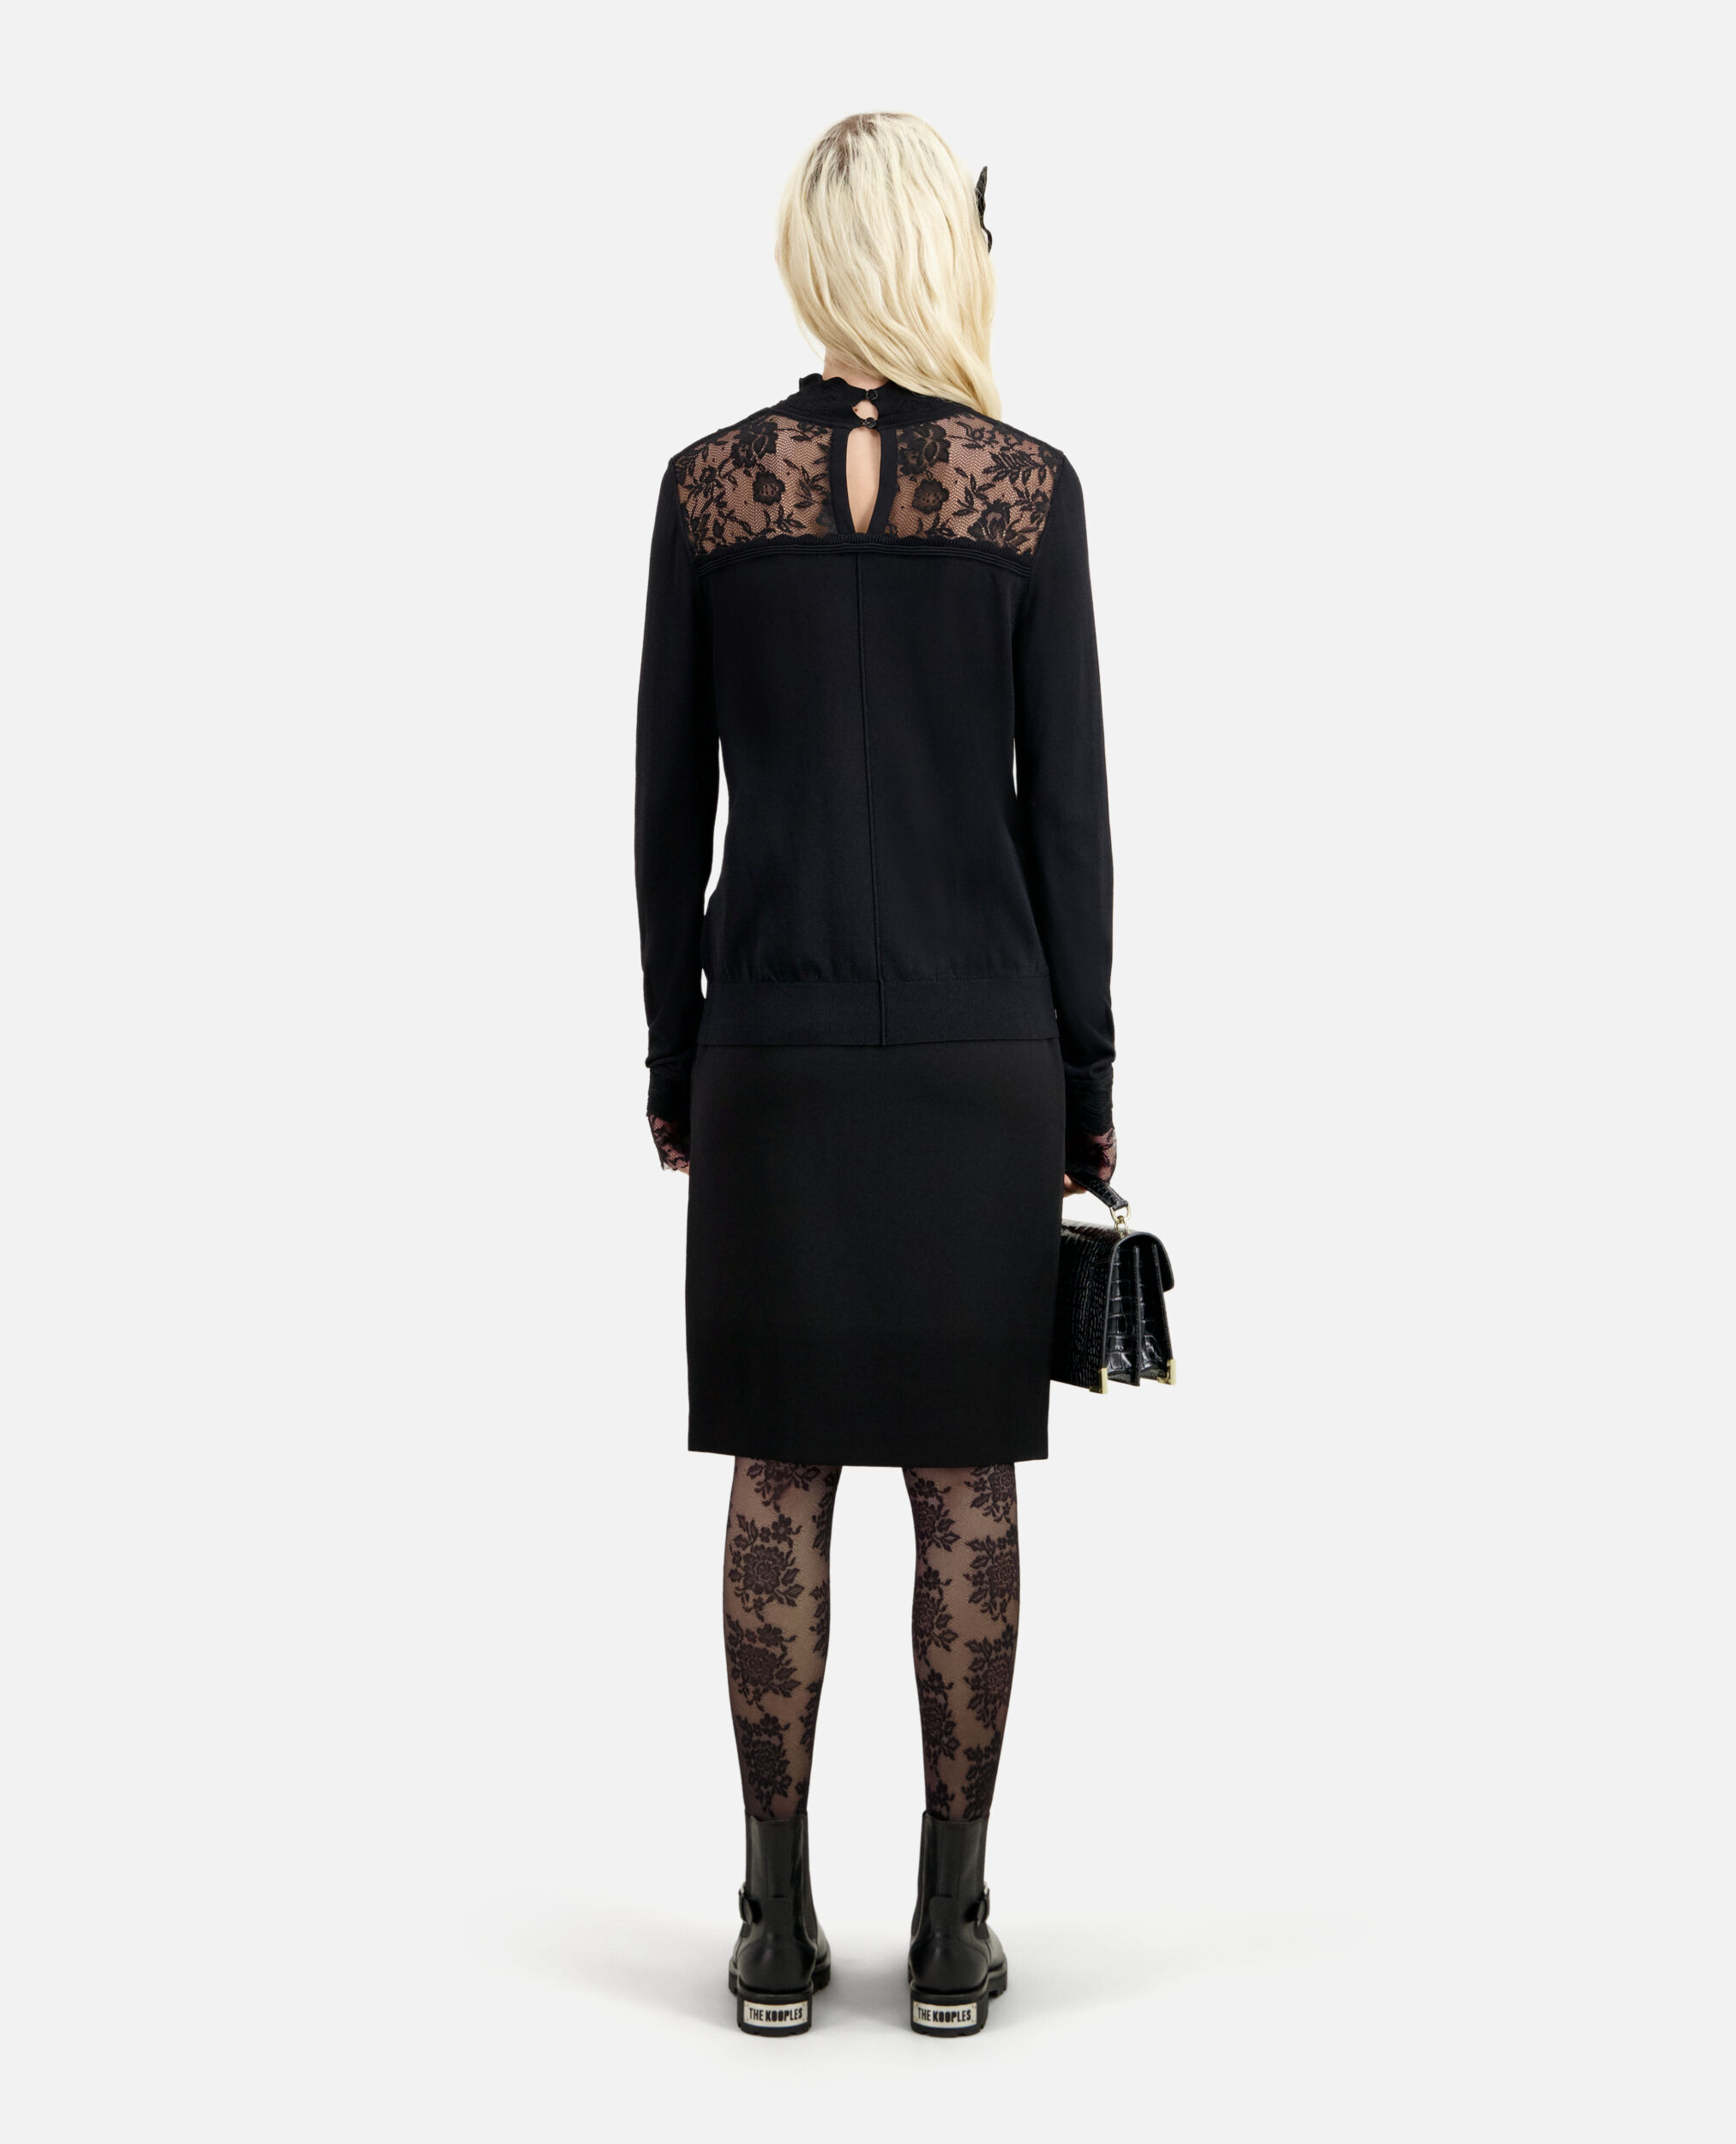 Black sweater with lace details, BLACK, hi-res image number null